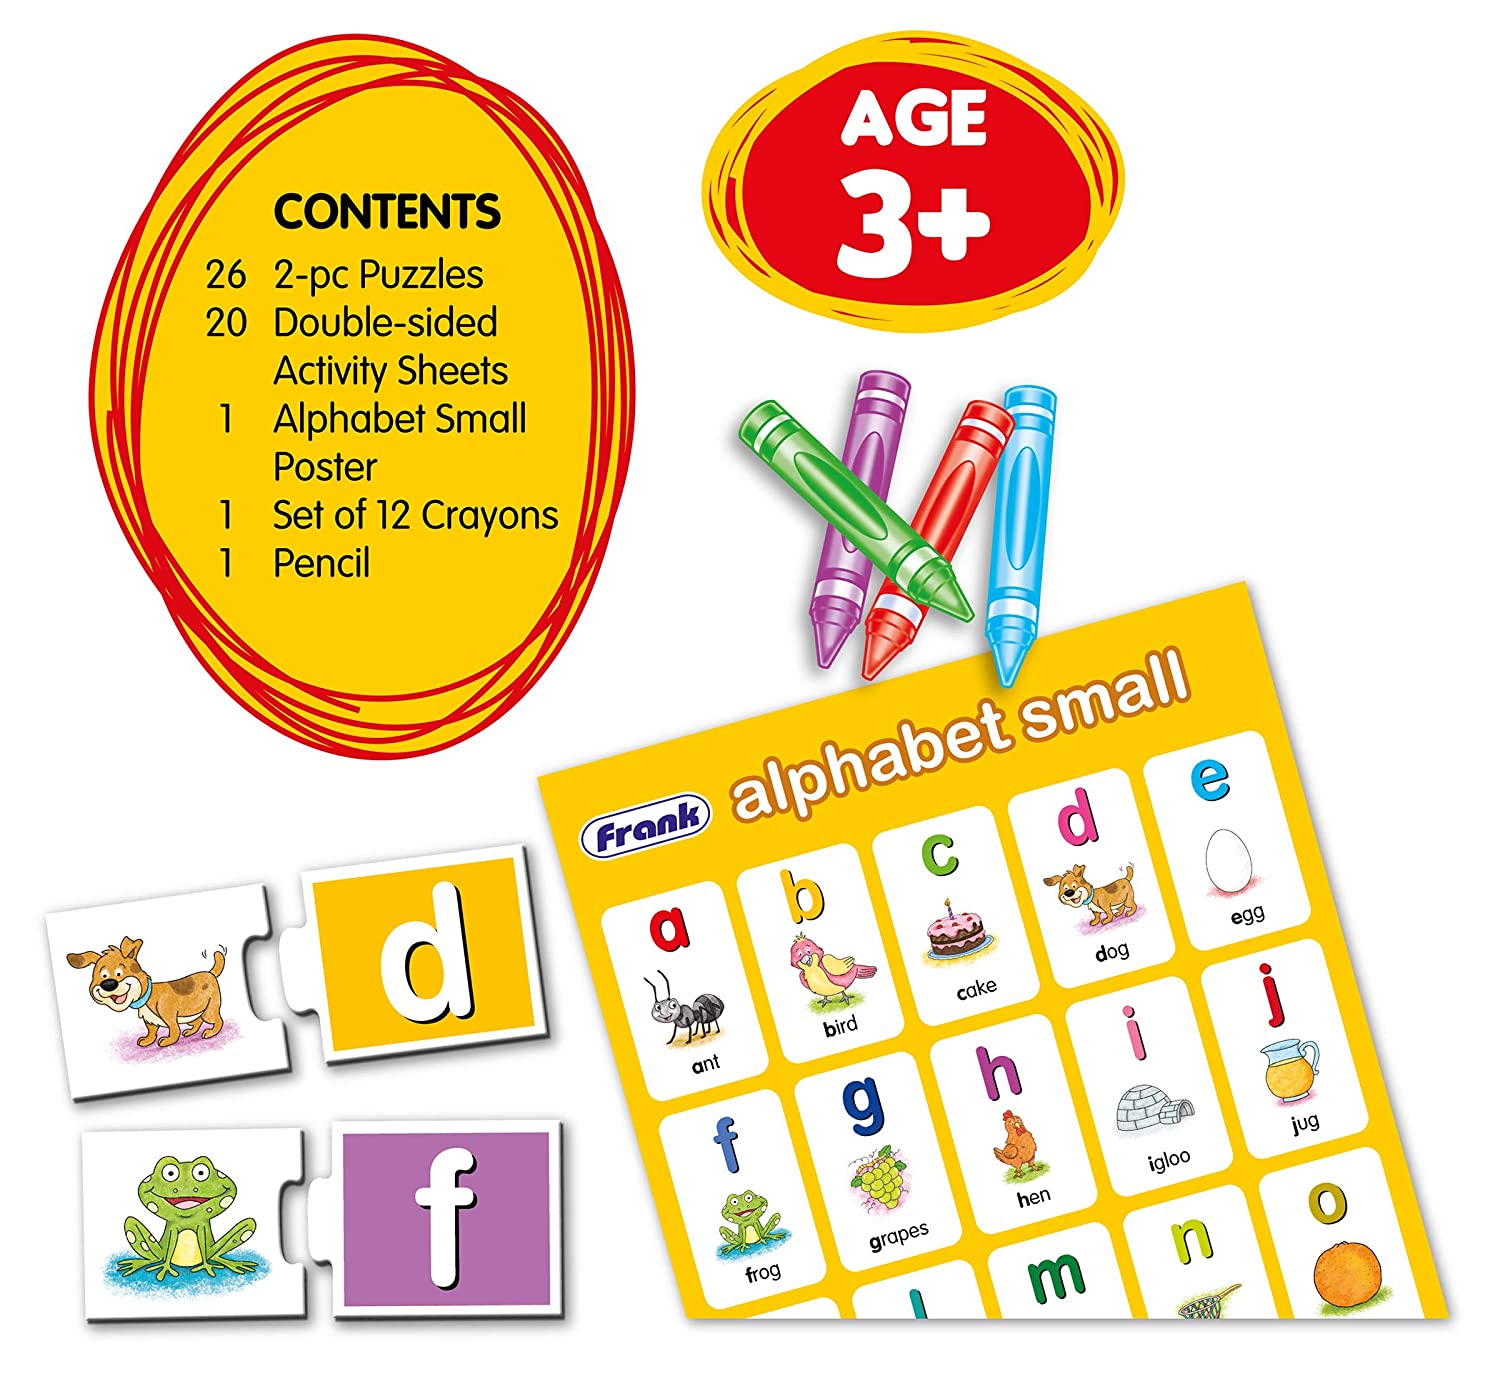 Frank Educational Early Learning – Small Alphabet Kit